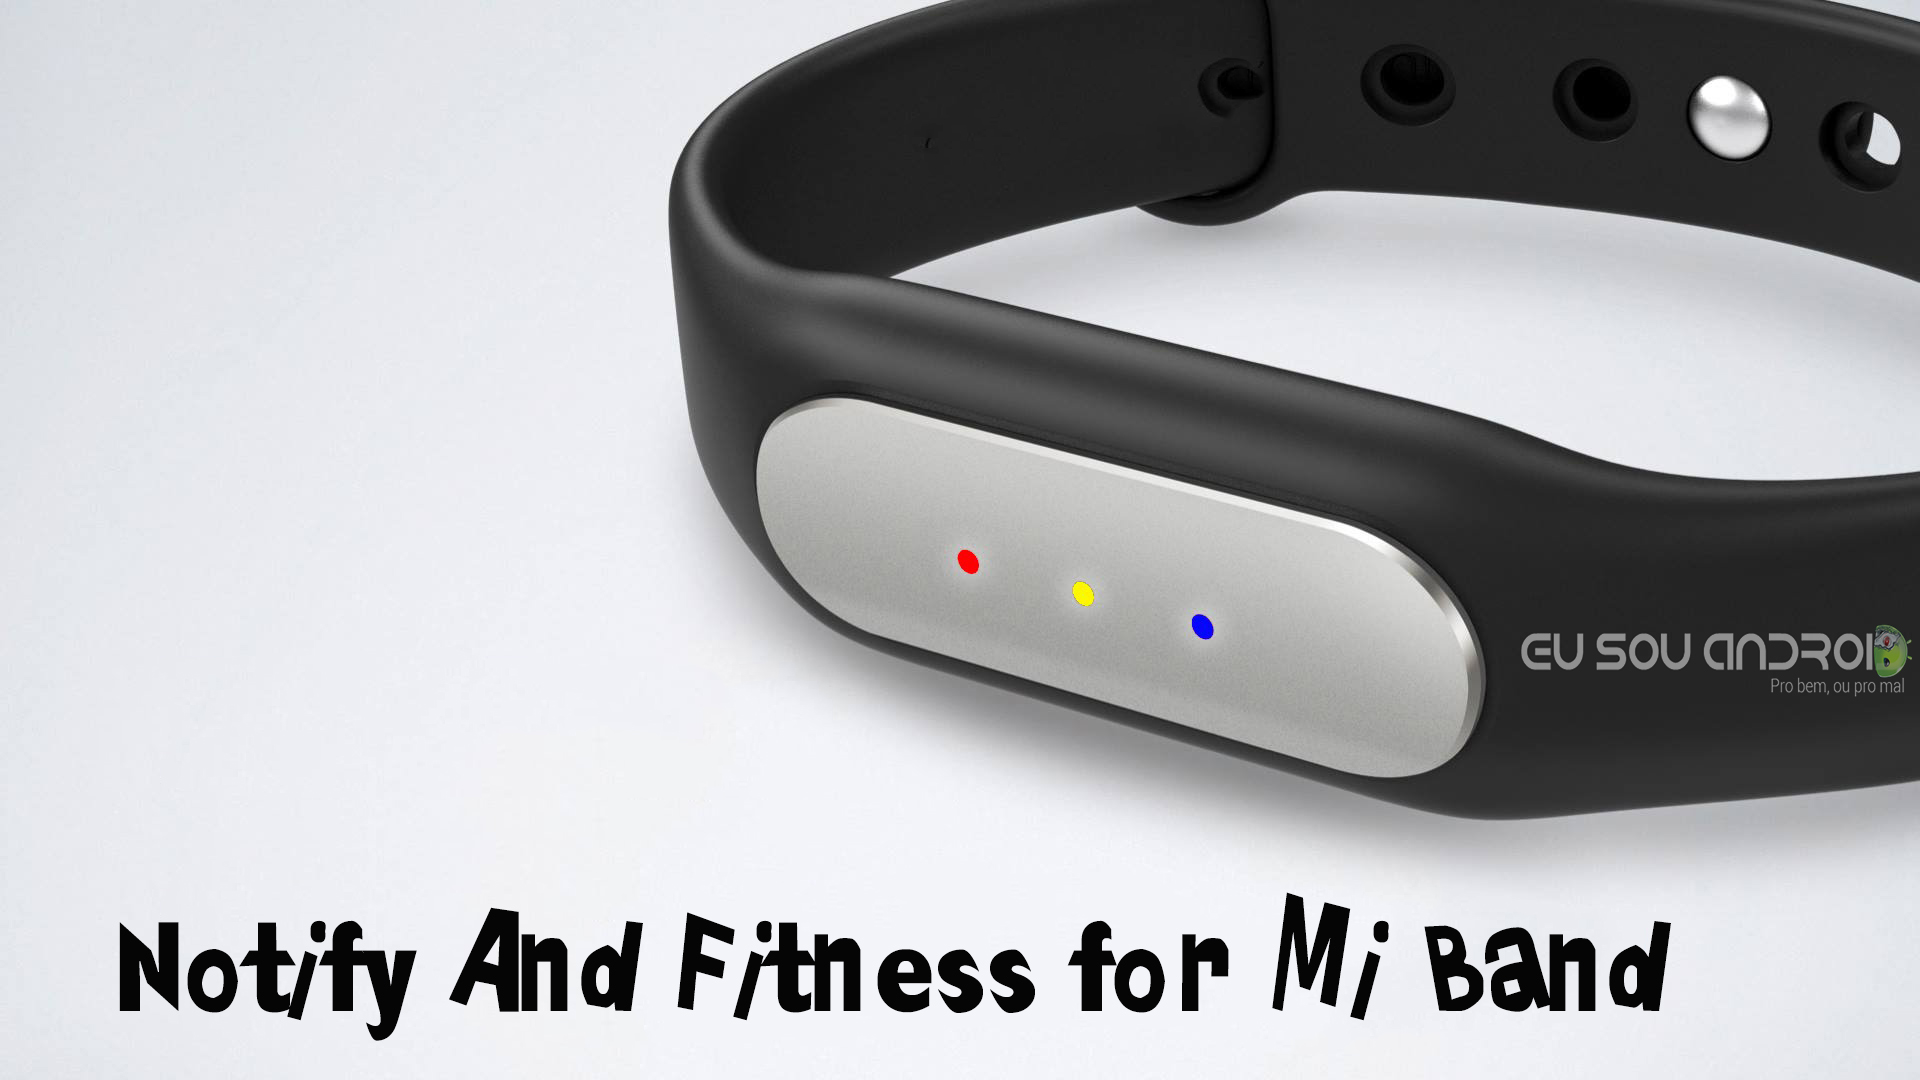 download notify for mi band